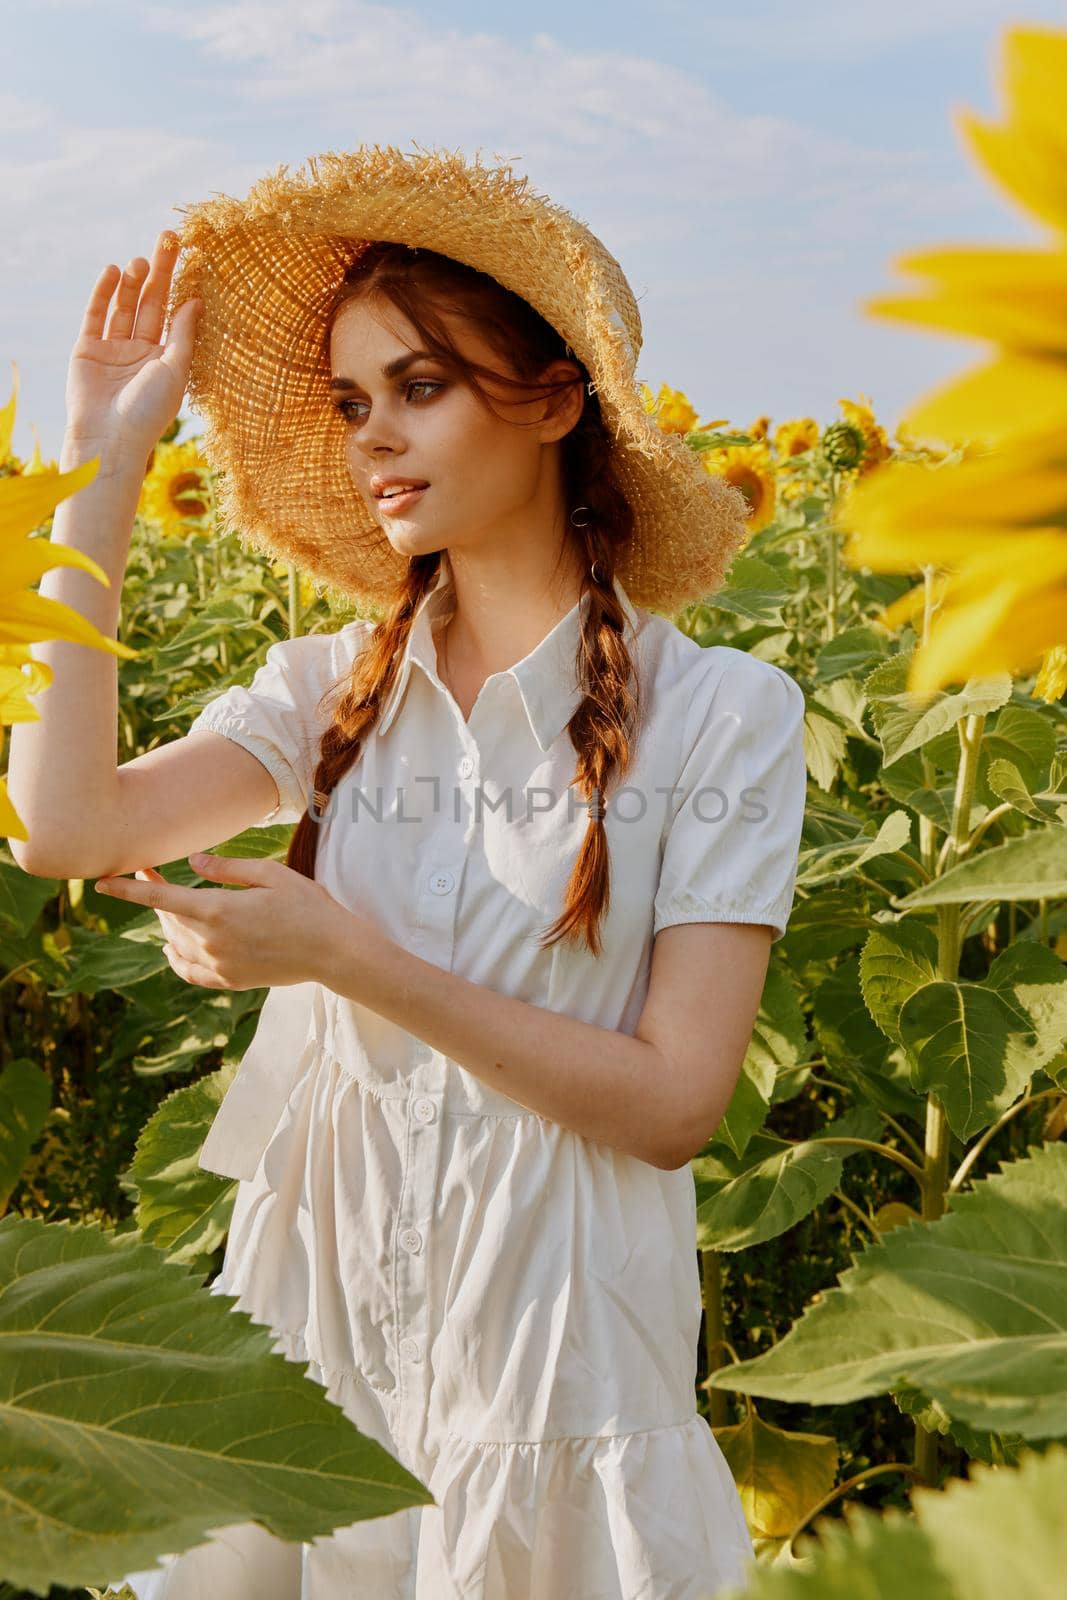 woman with two pigtails in a field of sunflowers lifestyle unaltered. High quality photo